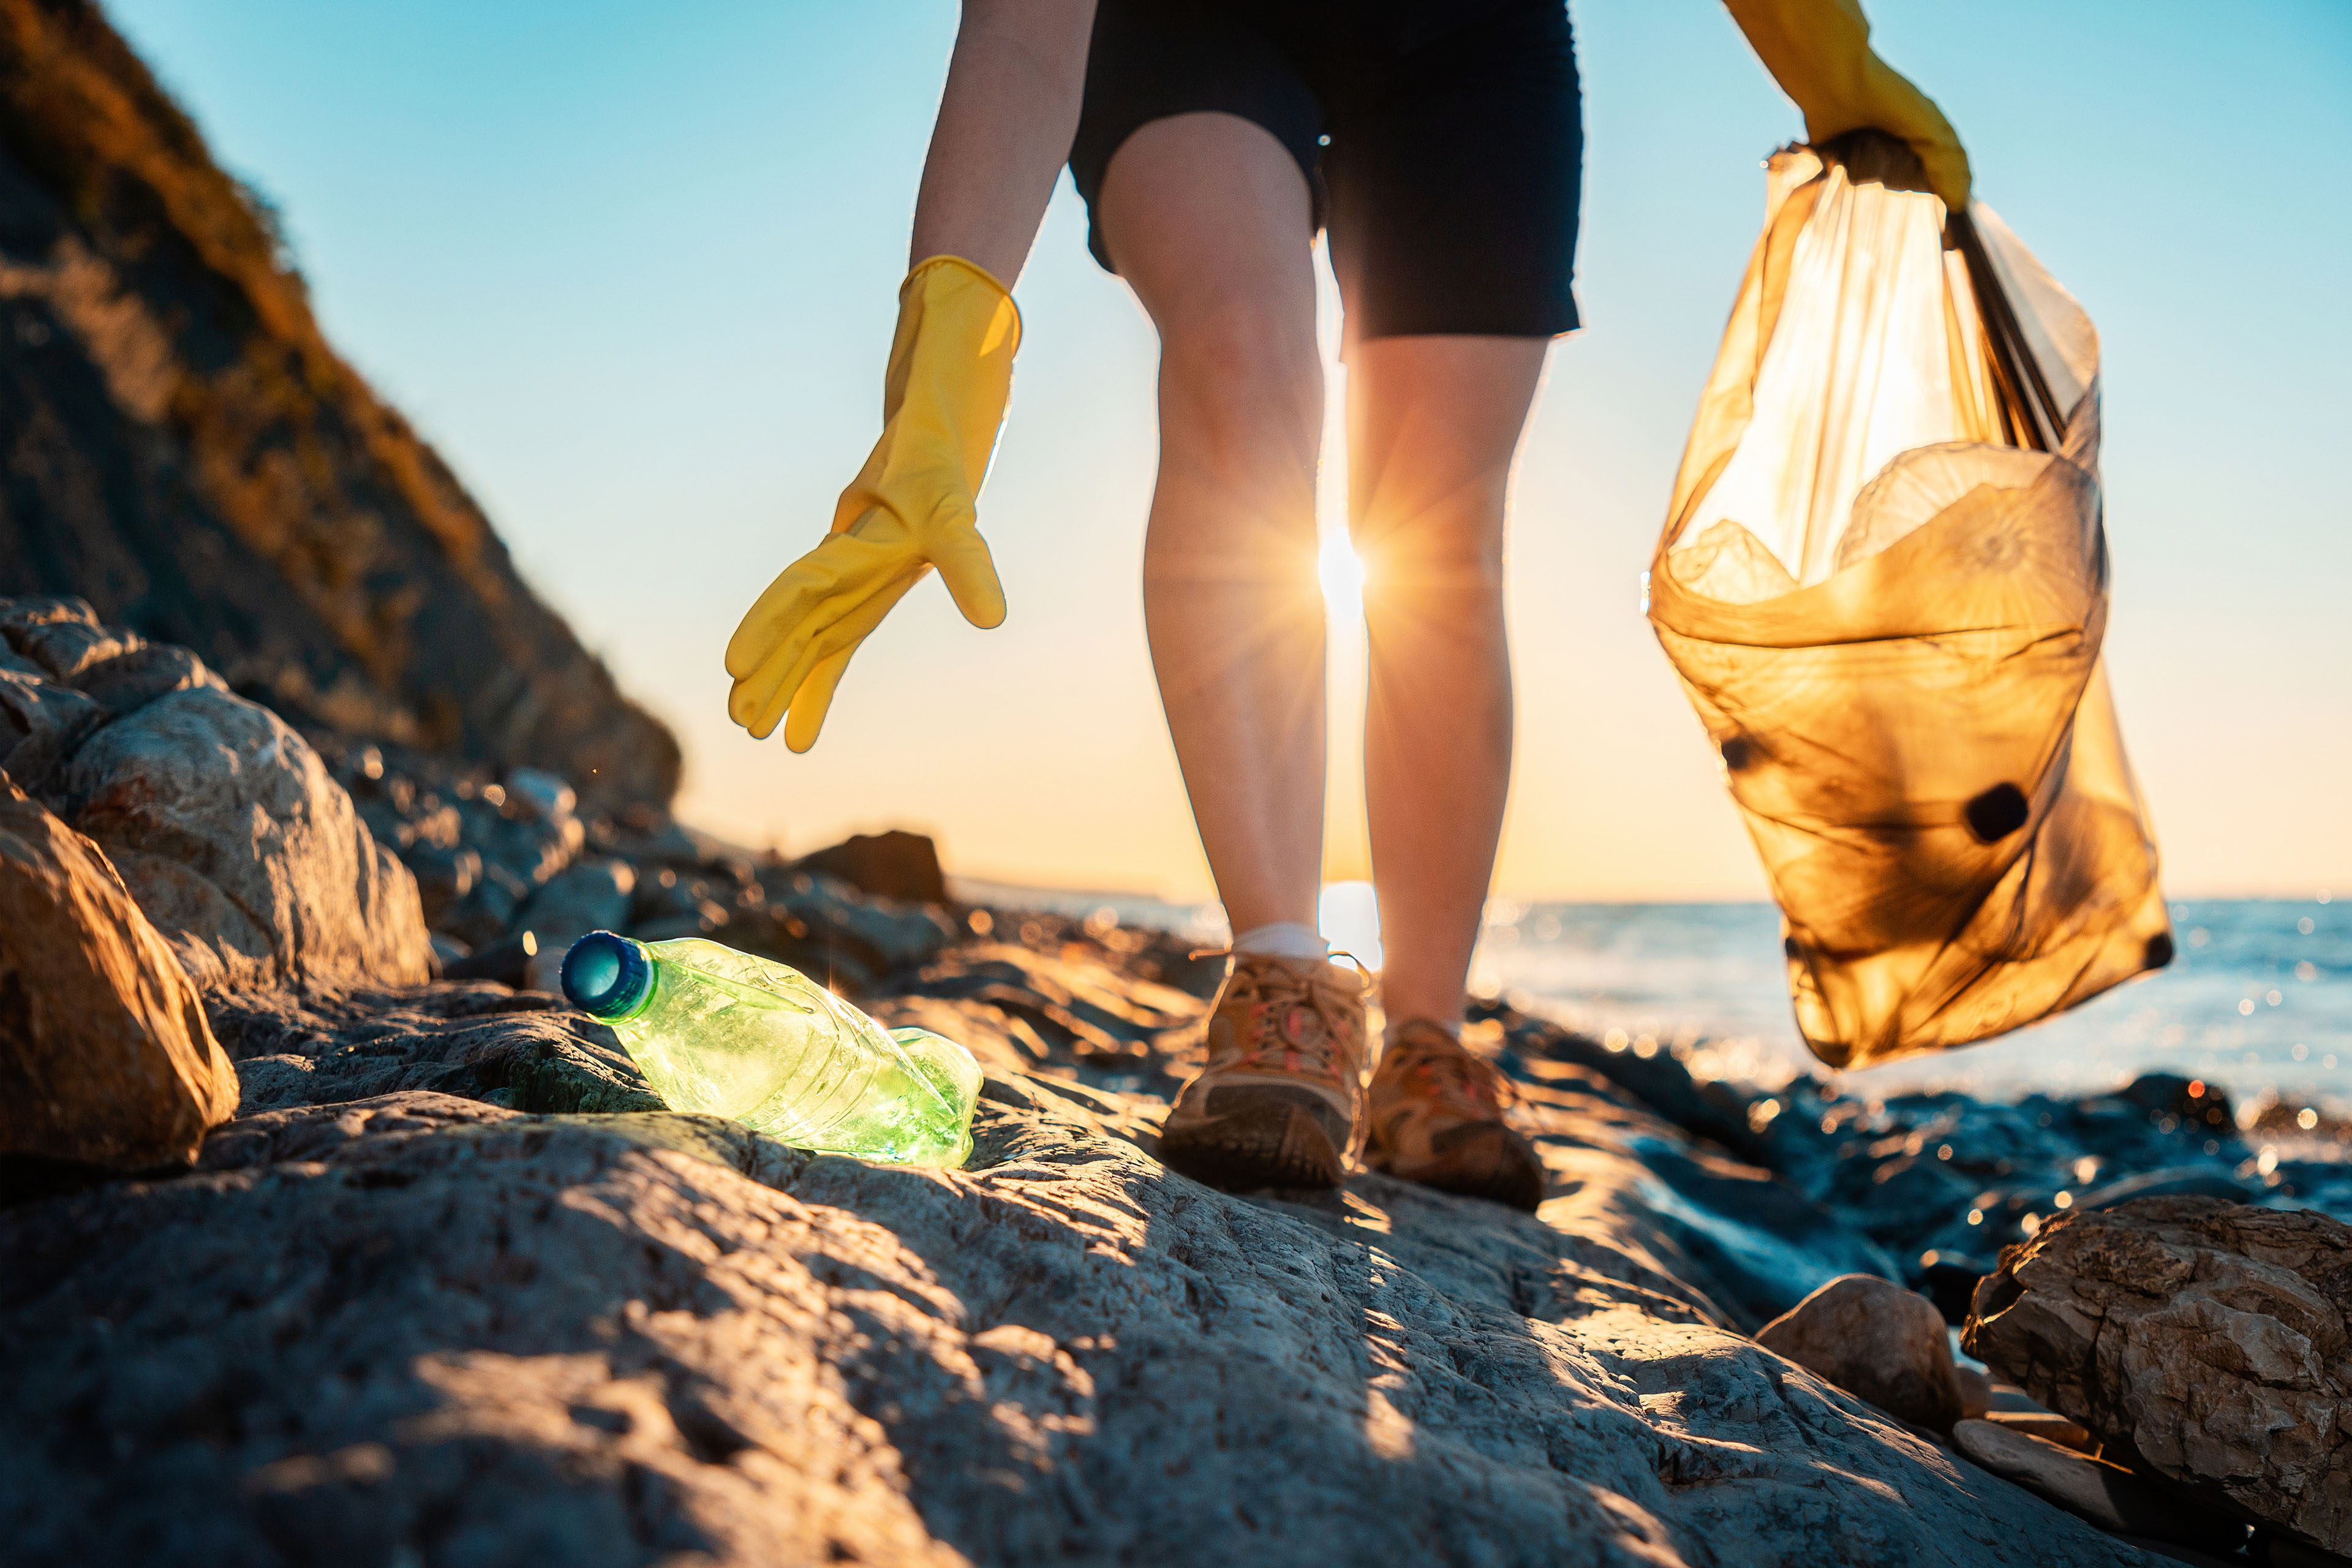 https://assets.ey.com/content/dam/ey-sites/ey-com/en_us/topics/climate-change-sustainability-services/ey-a-volunteer-collects-plastic-bottles-on-the-ocean-shore.jpg